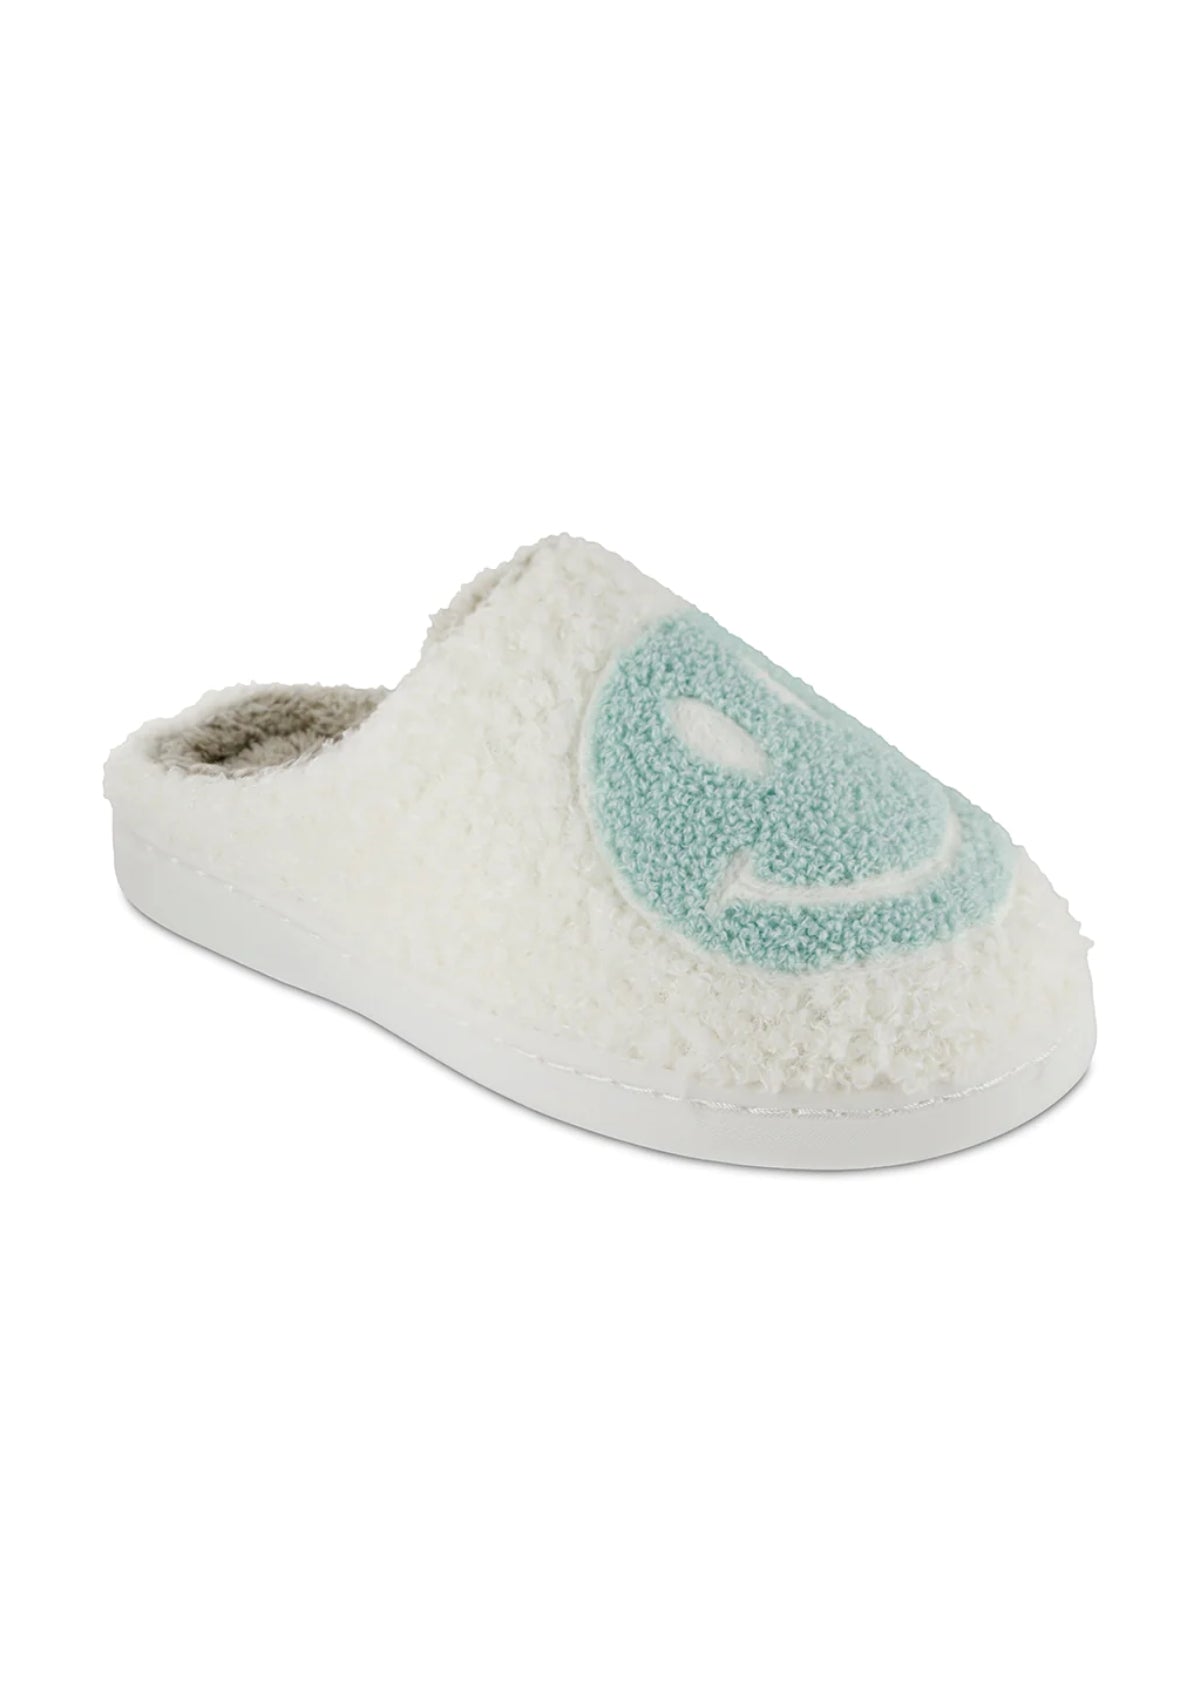 White sherpa fuzzy slippers with light green smiley face with white eyes and mouth.